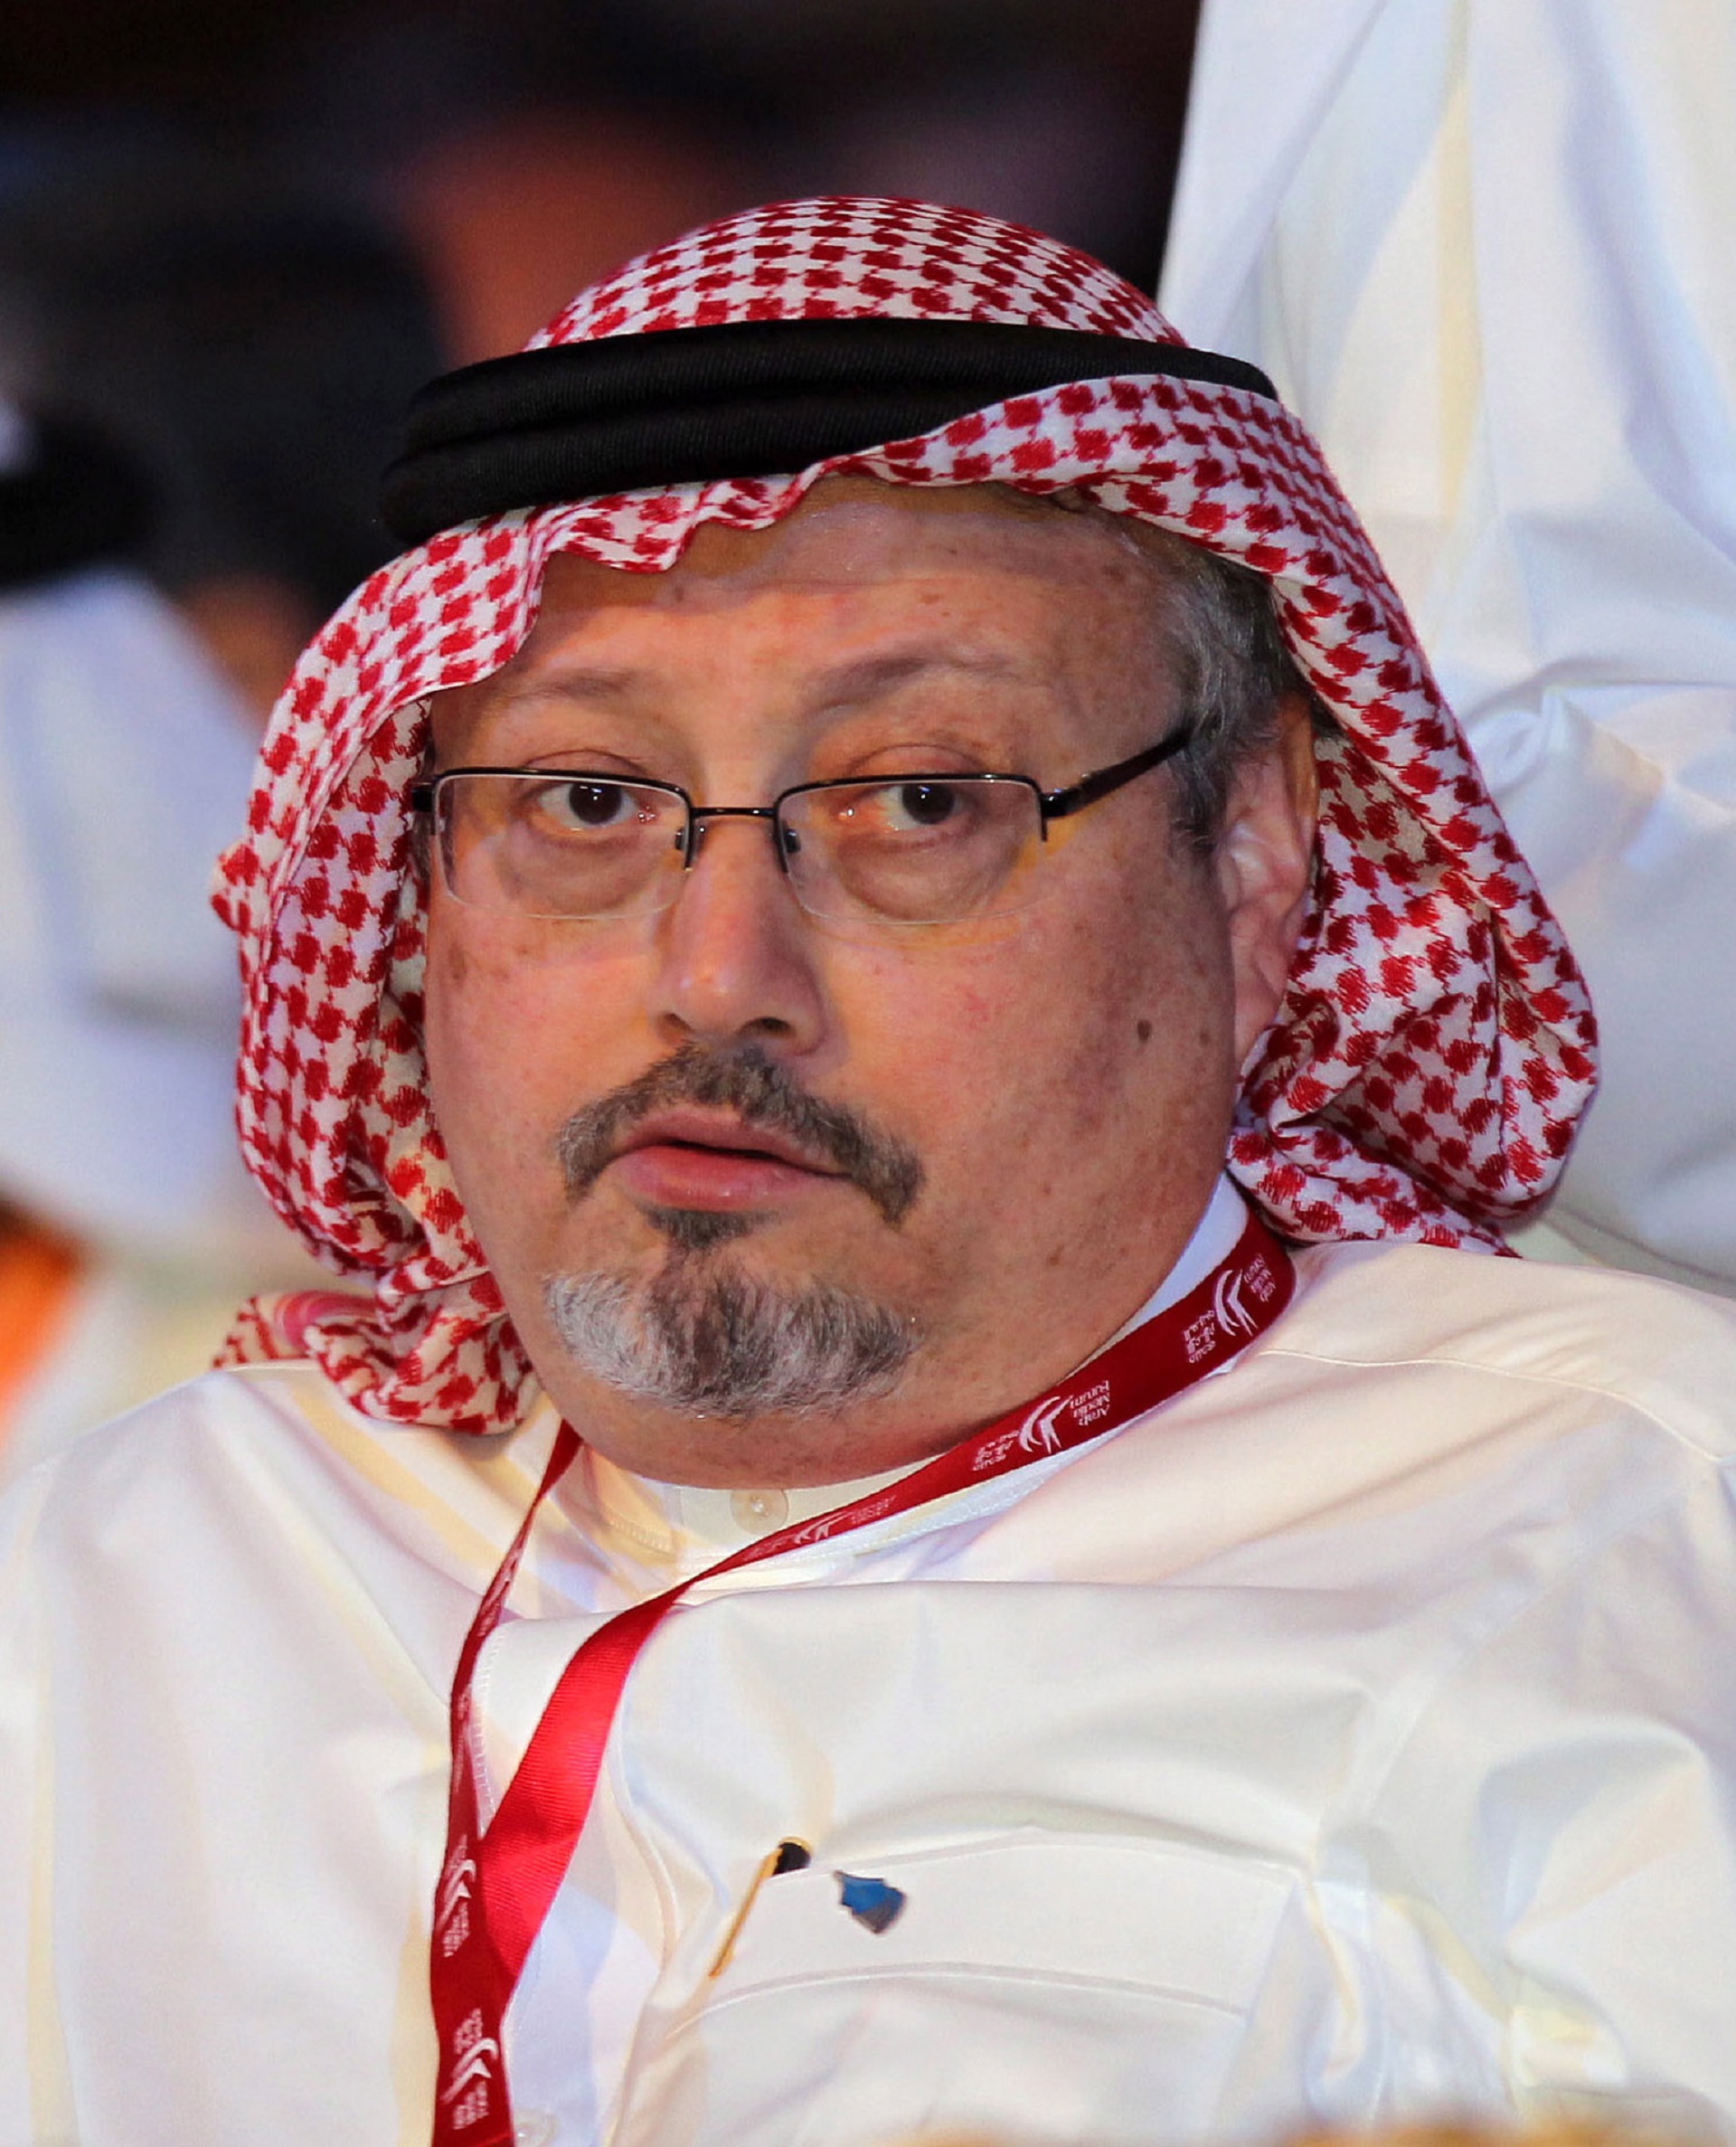 epa08522793 (FILE) - Saudi journalist and former editor-in-chief of the Saudi newspaper Al-Watan Jamal Khashoggi attends the opening ceremony of the 11th edition of the Arab Media Forum 2012 in Dubai, United Arab Emirates, 08 May 2012 (reissued 02 July 2020). Turkey will hold on 03 July 2020 a trial in absentia for 20 suspects, including two former aides to Saudi Crown Prince Mohammed bin Salman (MBS), for the murder of journalist Jamal Khashoggi in October 2018, according to media reports.  EPA/ALI HAIDER *** Local Caption *** 55726295